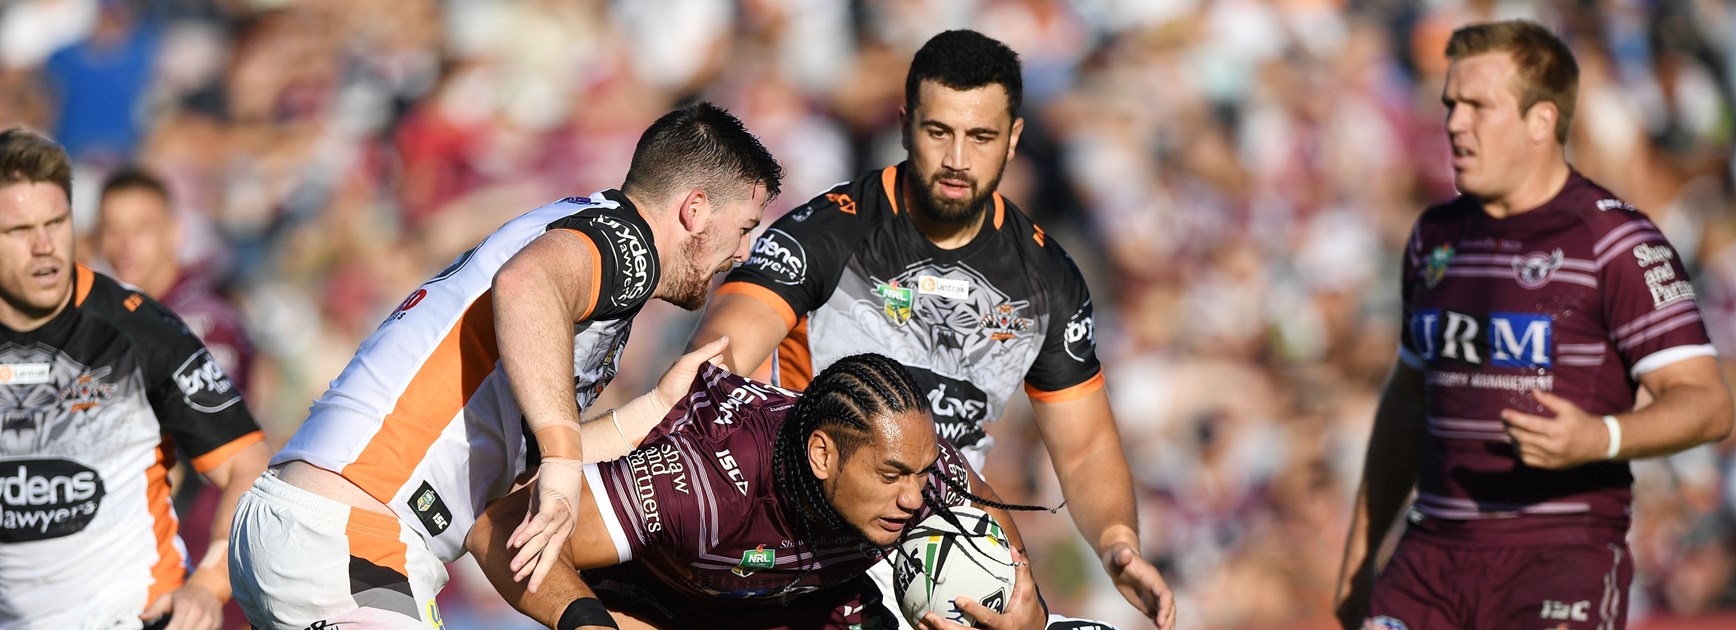 Manly lose 38-12 to Wests Tigers